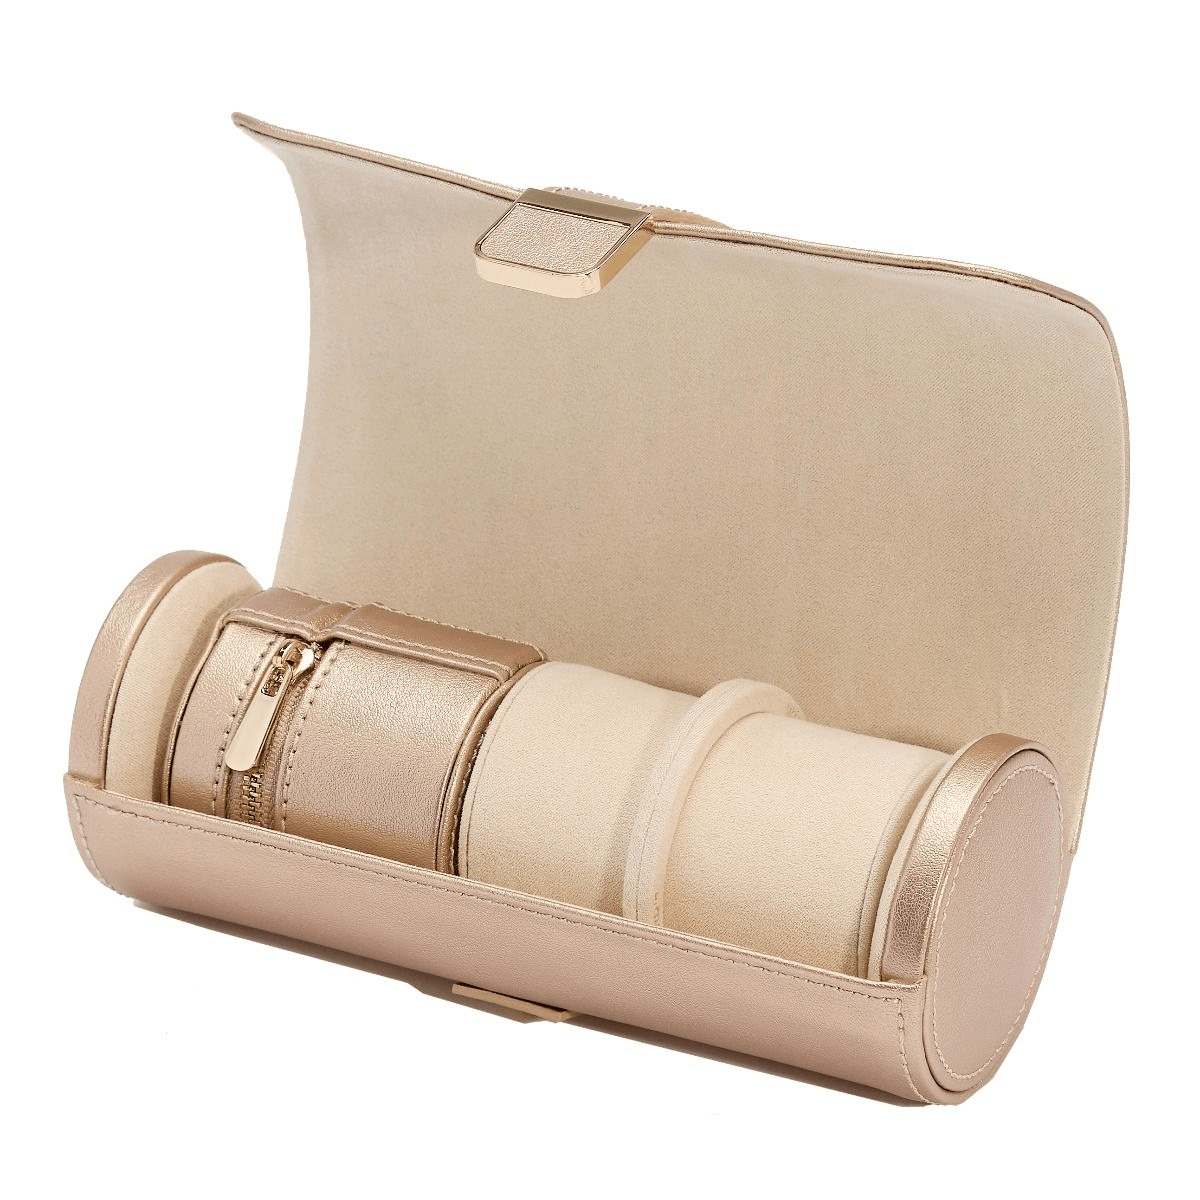 WOLF Palermo Rose Gold Double Watch Roll With Jewelry Pouch 213916